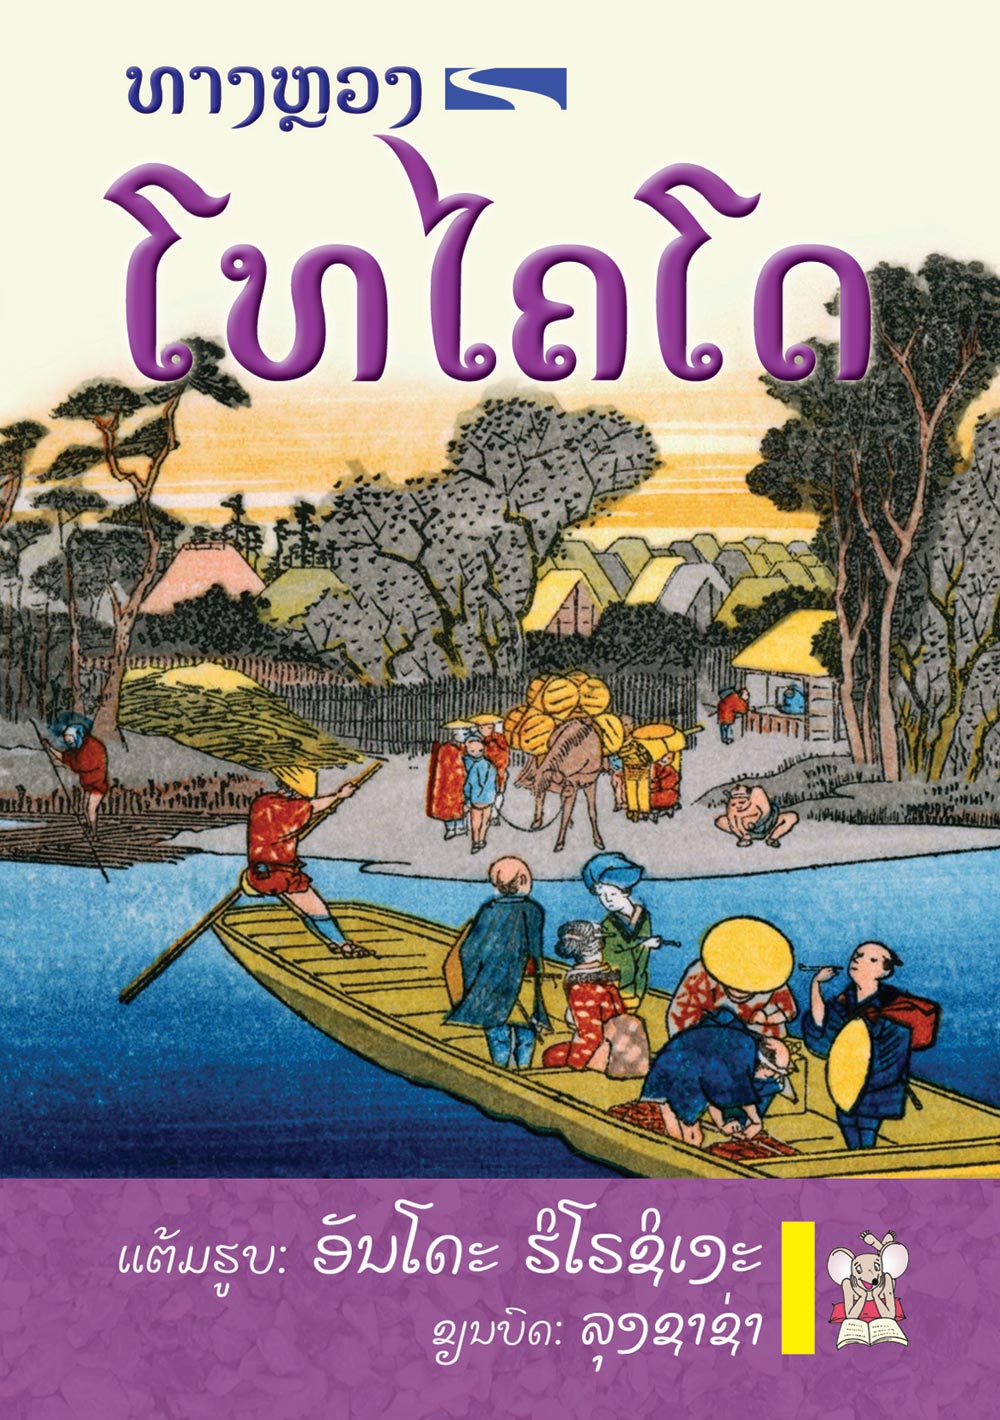 Tokaido Road large book cover, published in Lao language